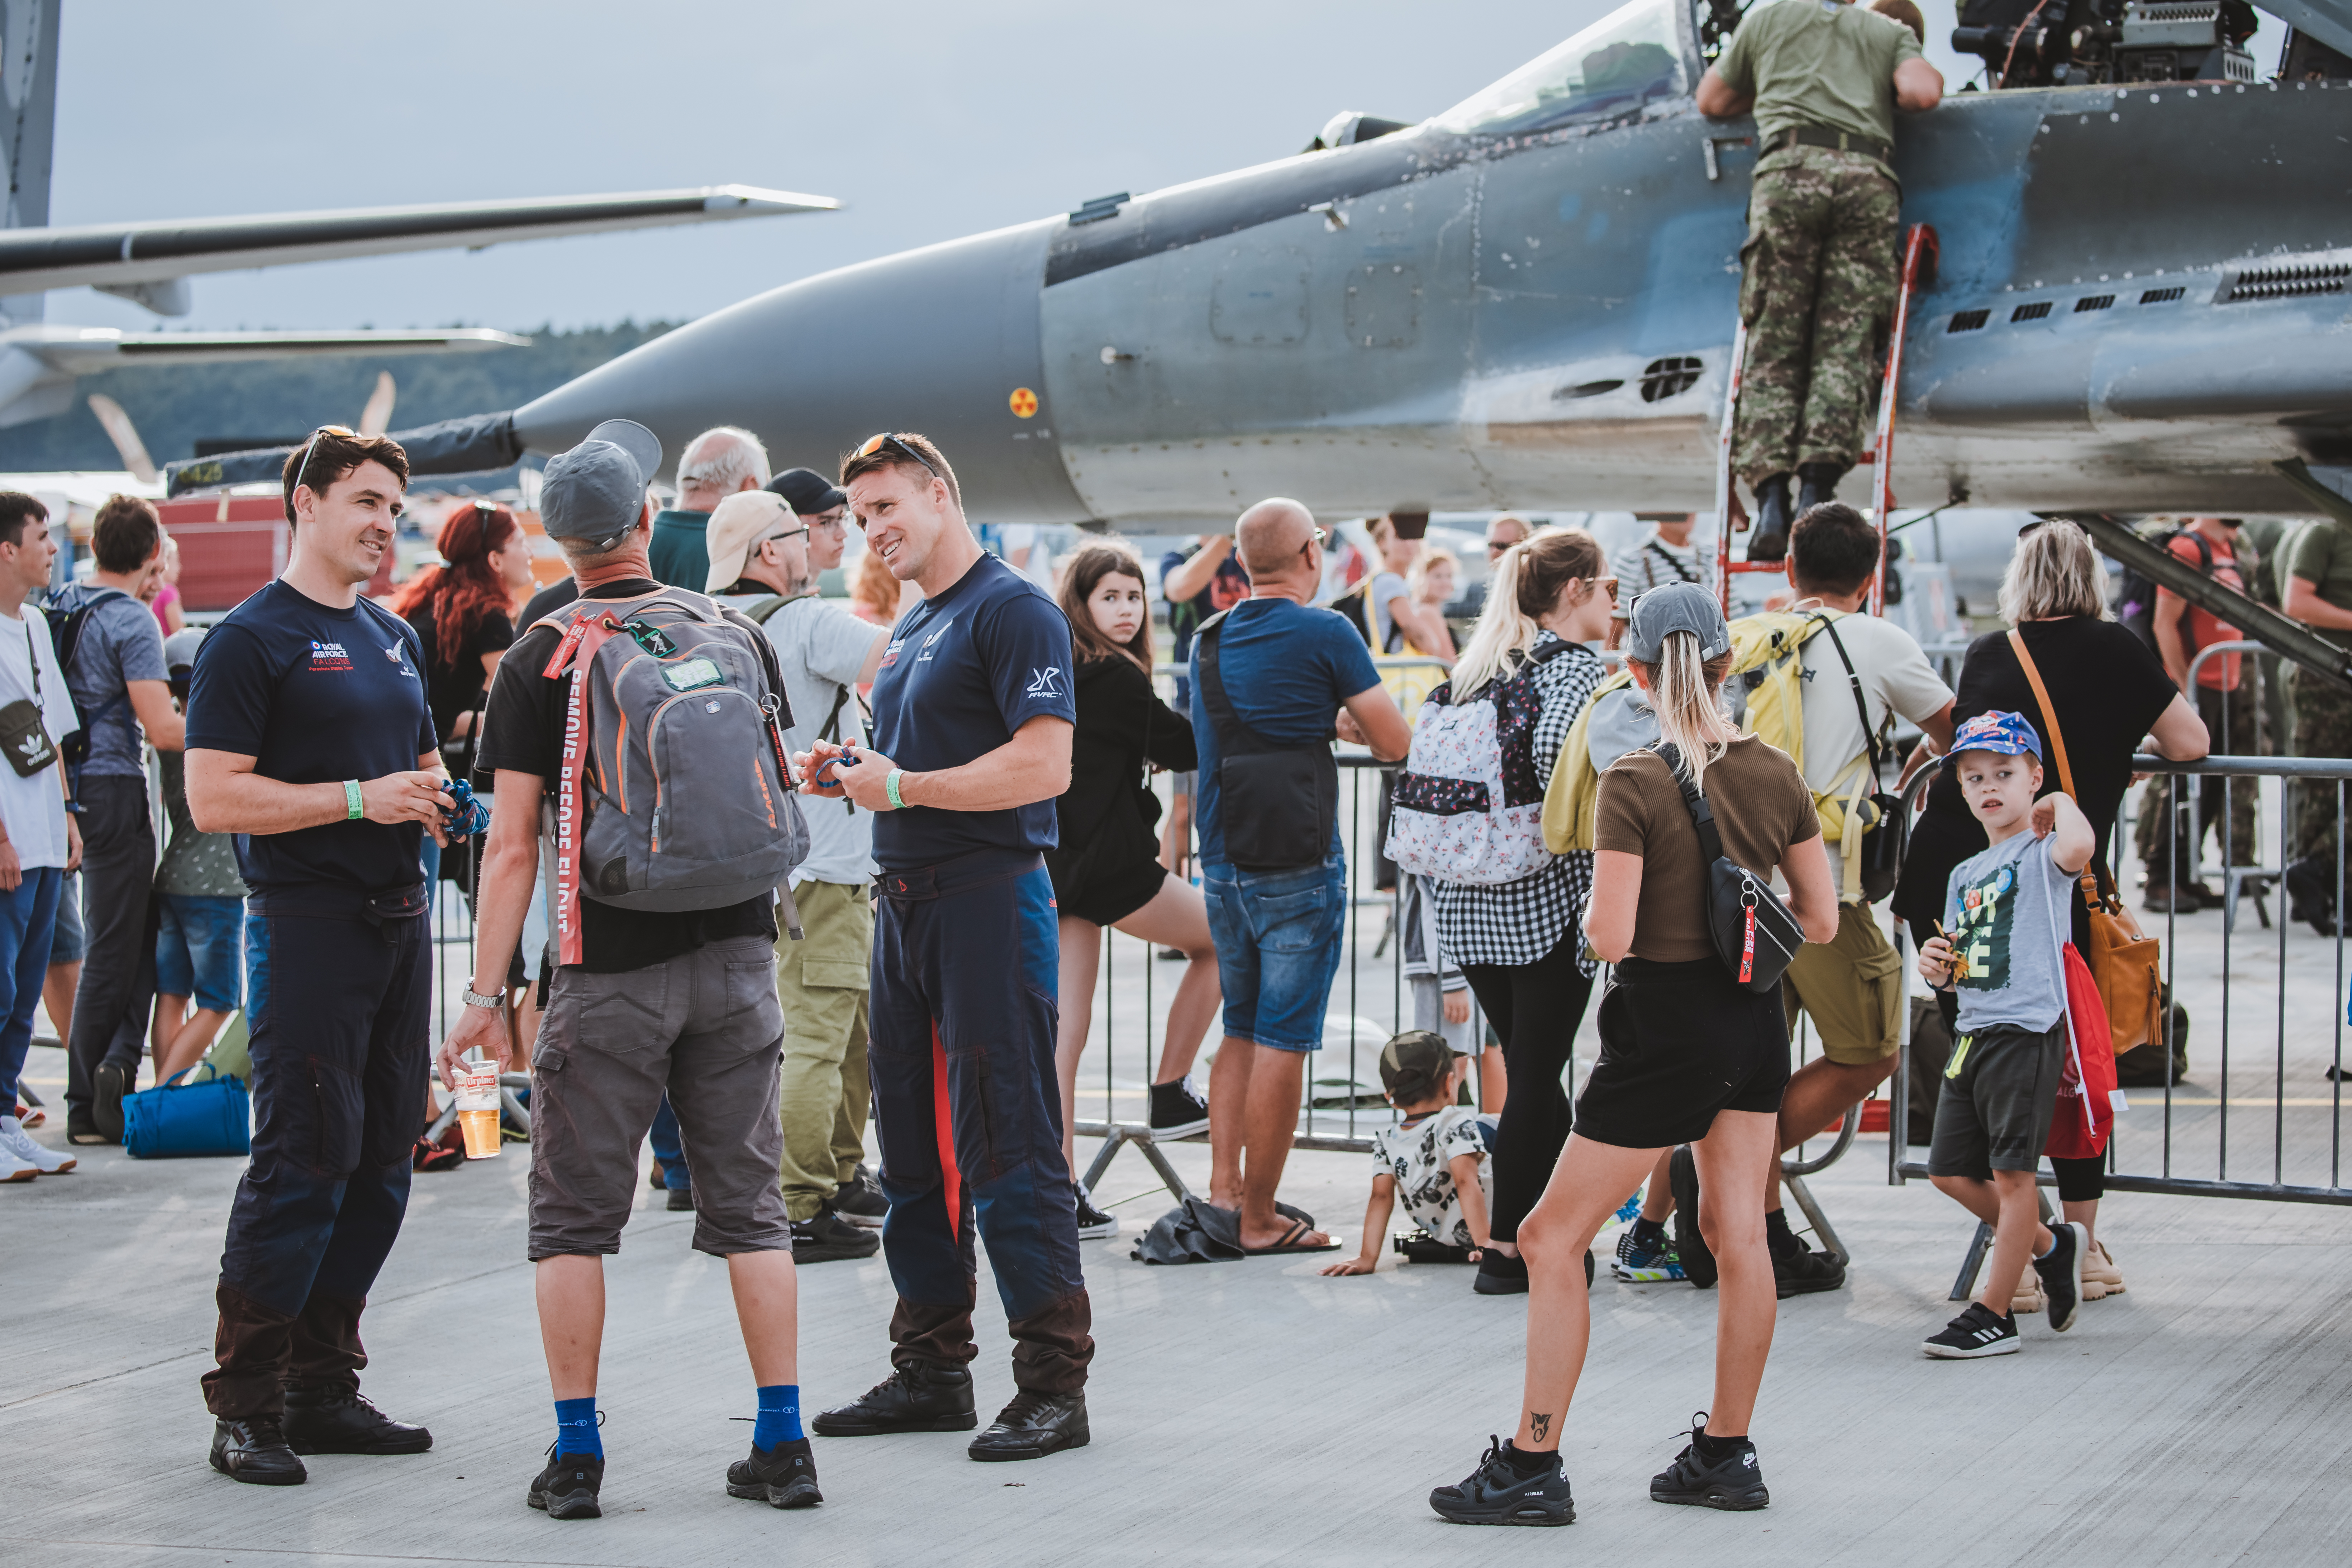 Image shows RAF aviators interacting with public on airfield.